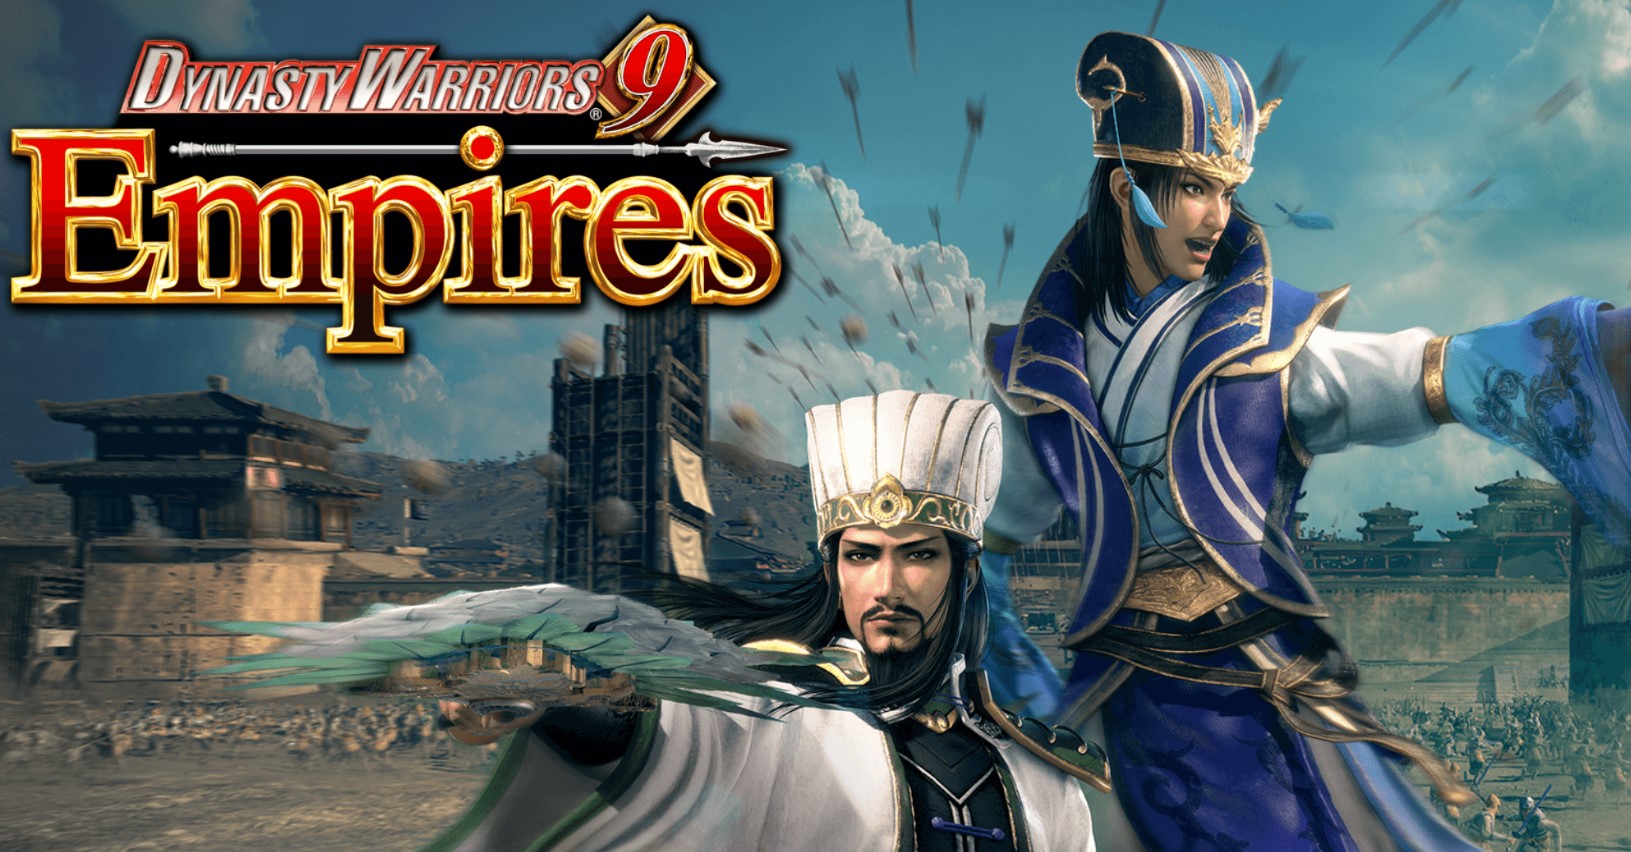 dynasty warriors 9 empires demo release date